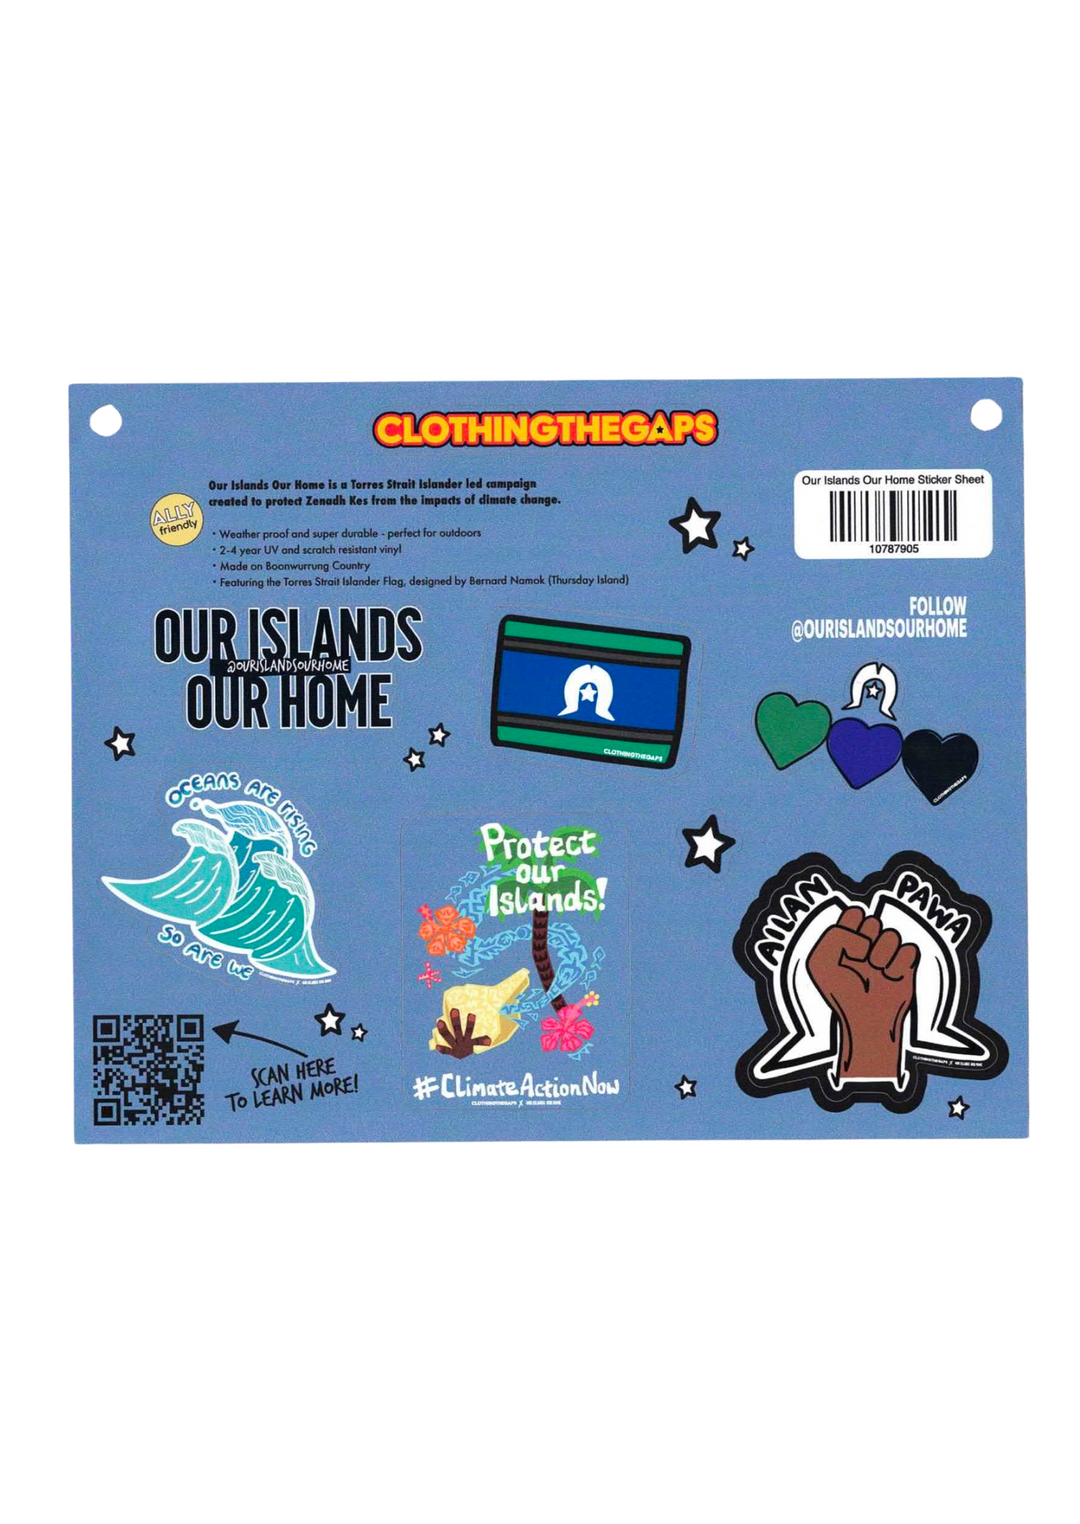 Clothing The Gaps. Our Islands Our Home Sticker Sheet. The pack includes five (5) x heavy duty 3-5 year vinyl stickers. Sticker One: 'Our Islands Our Home' campaign sticker. Sticker Two:  'Oceans are rising so are we' sticker. Sticker Three: 'Protect Our Islands #ClimateActionNow' sticker. Sticker Four: Love hearts in the colours of the Torres Strait Islander flag sticker. Sticker Five: 'Ailan Pawa' (Island power) sticker Sticker Six: The Torres Strait Islander flag sticker.